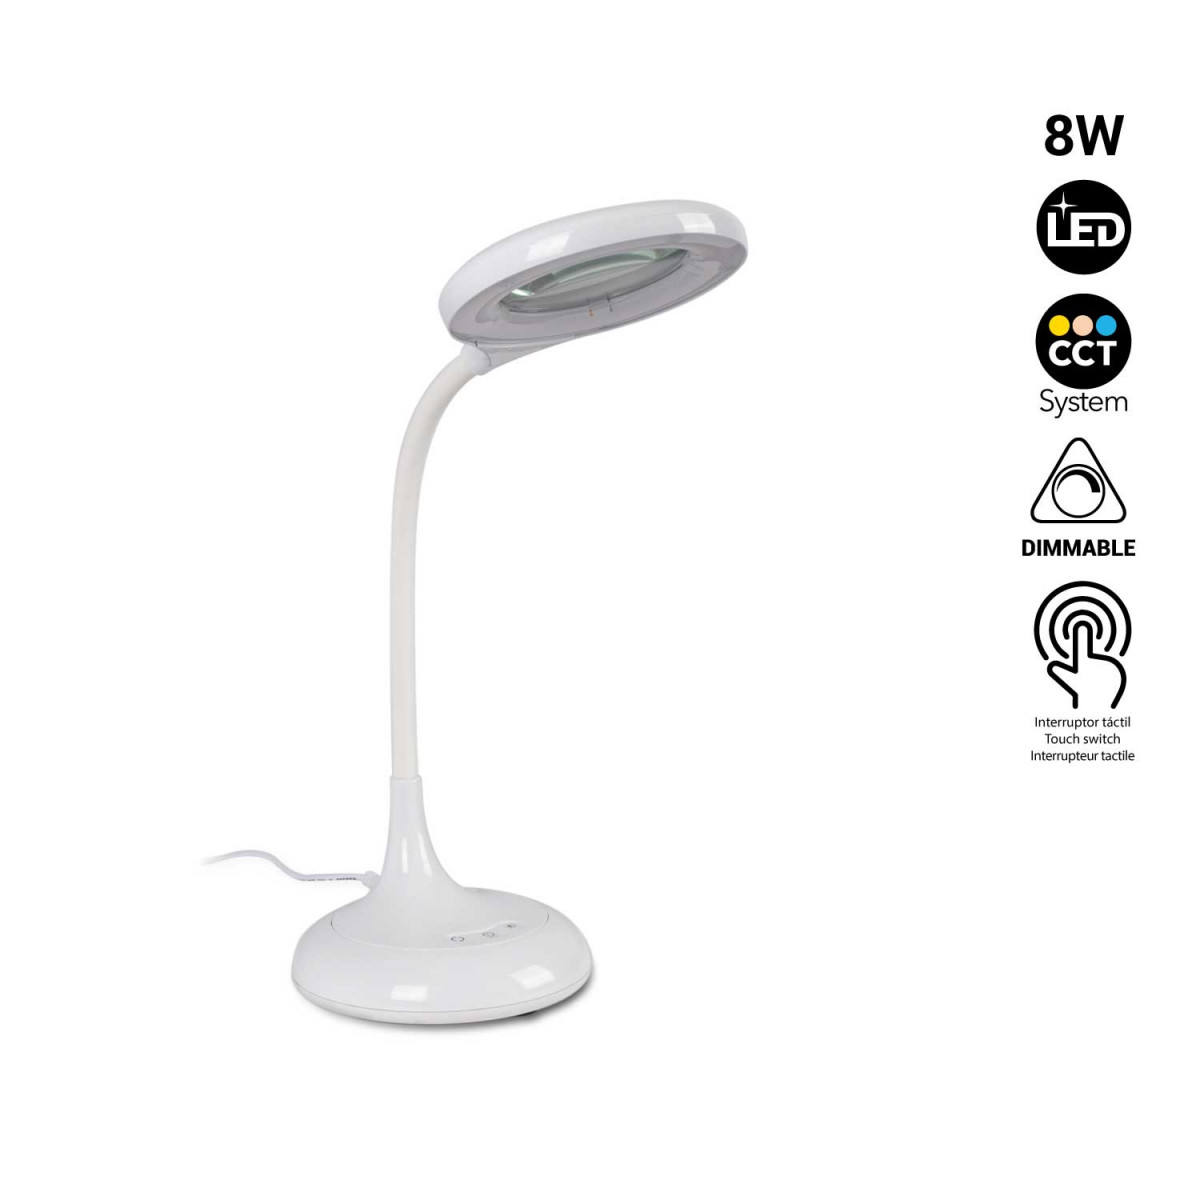 LED desk lamp with 3X magnifying glass - Dimmable - CCT - 8W